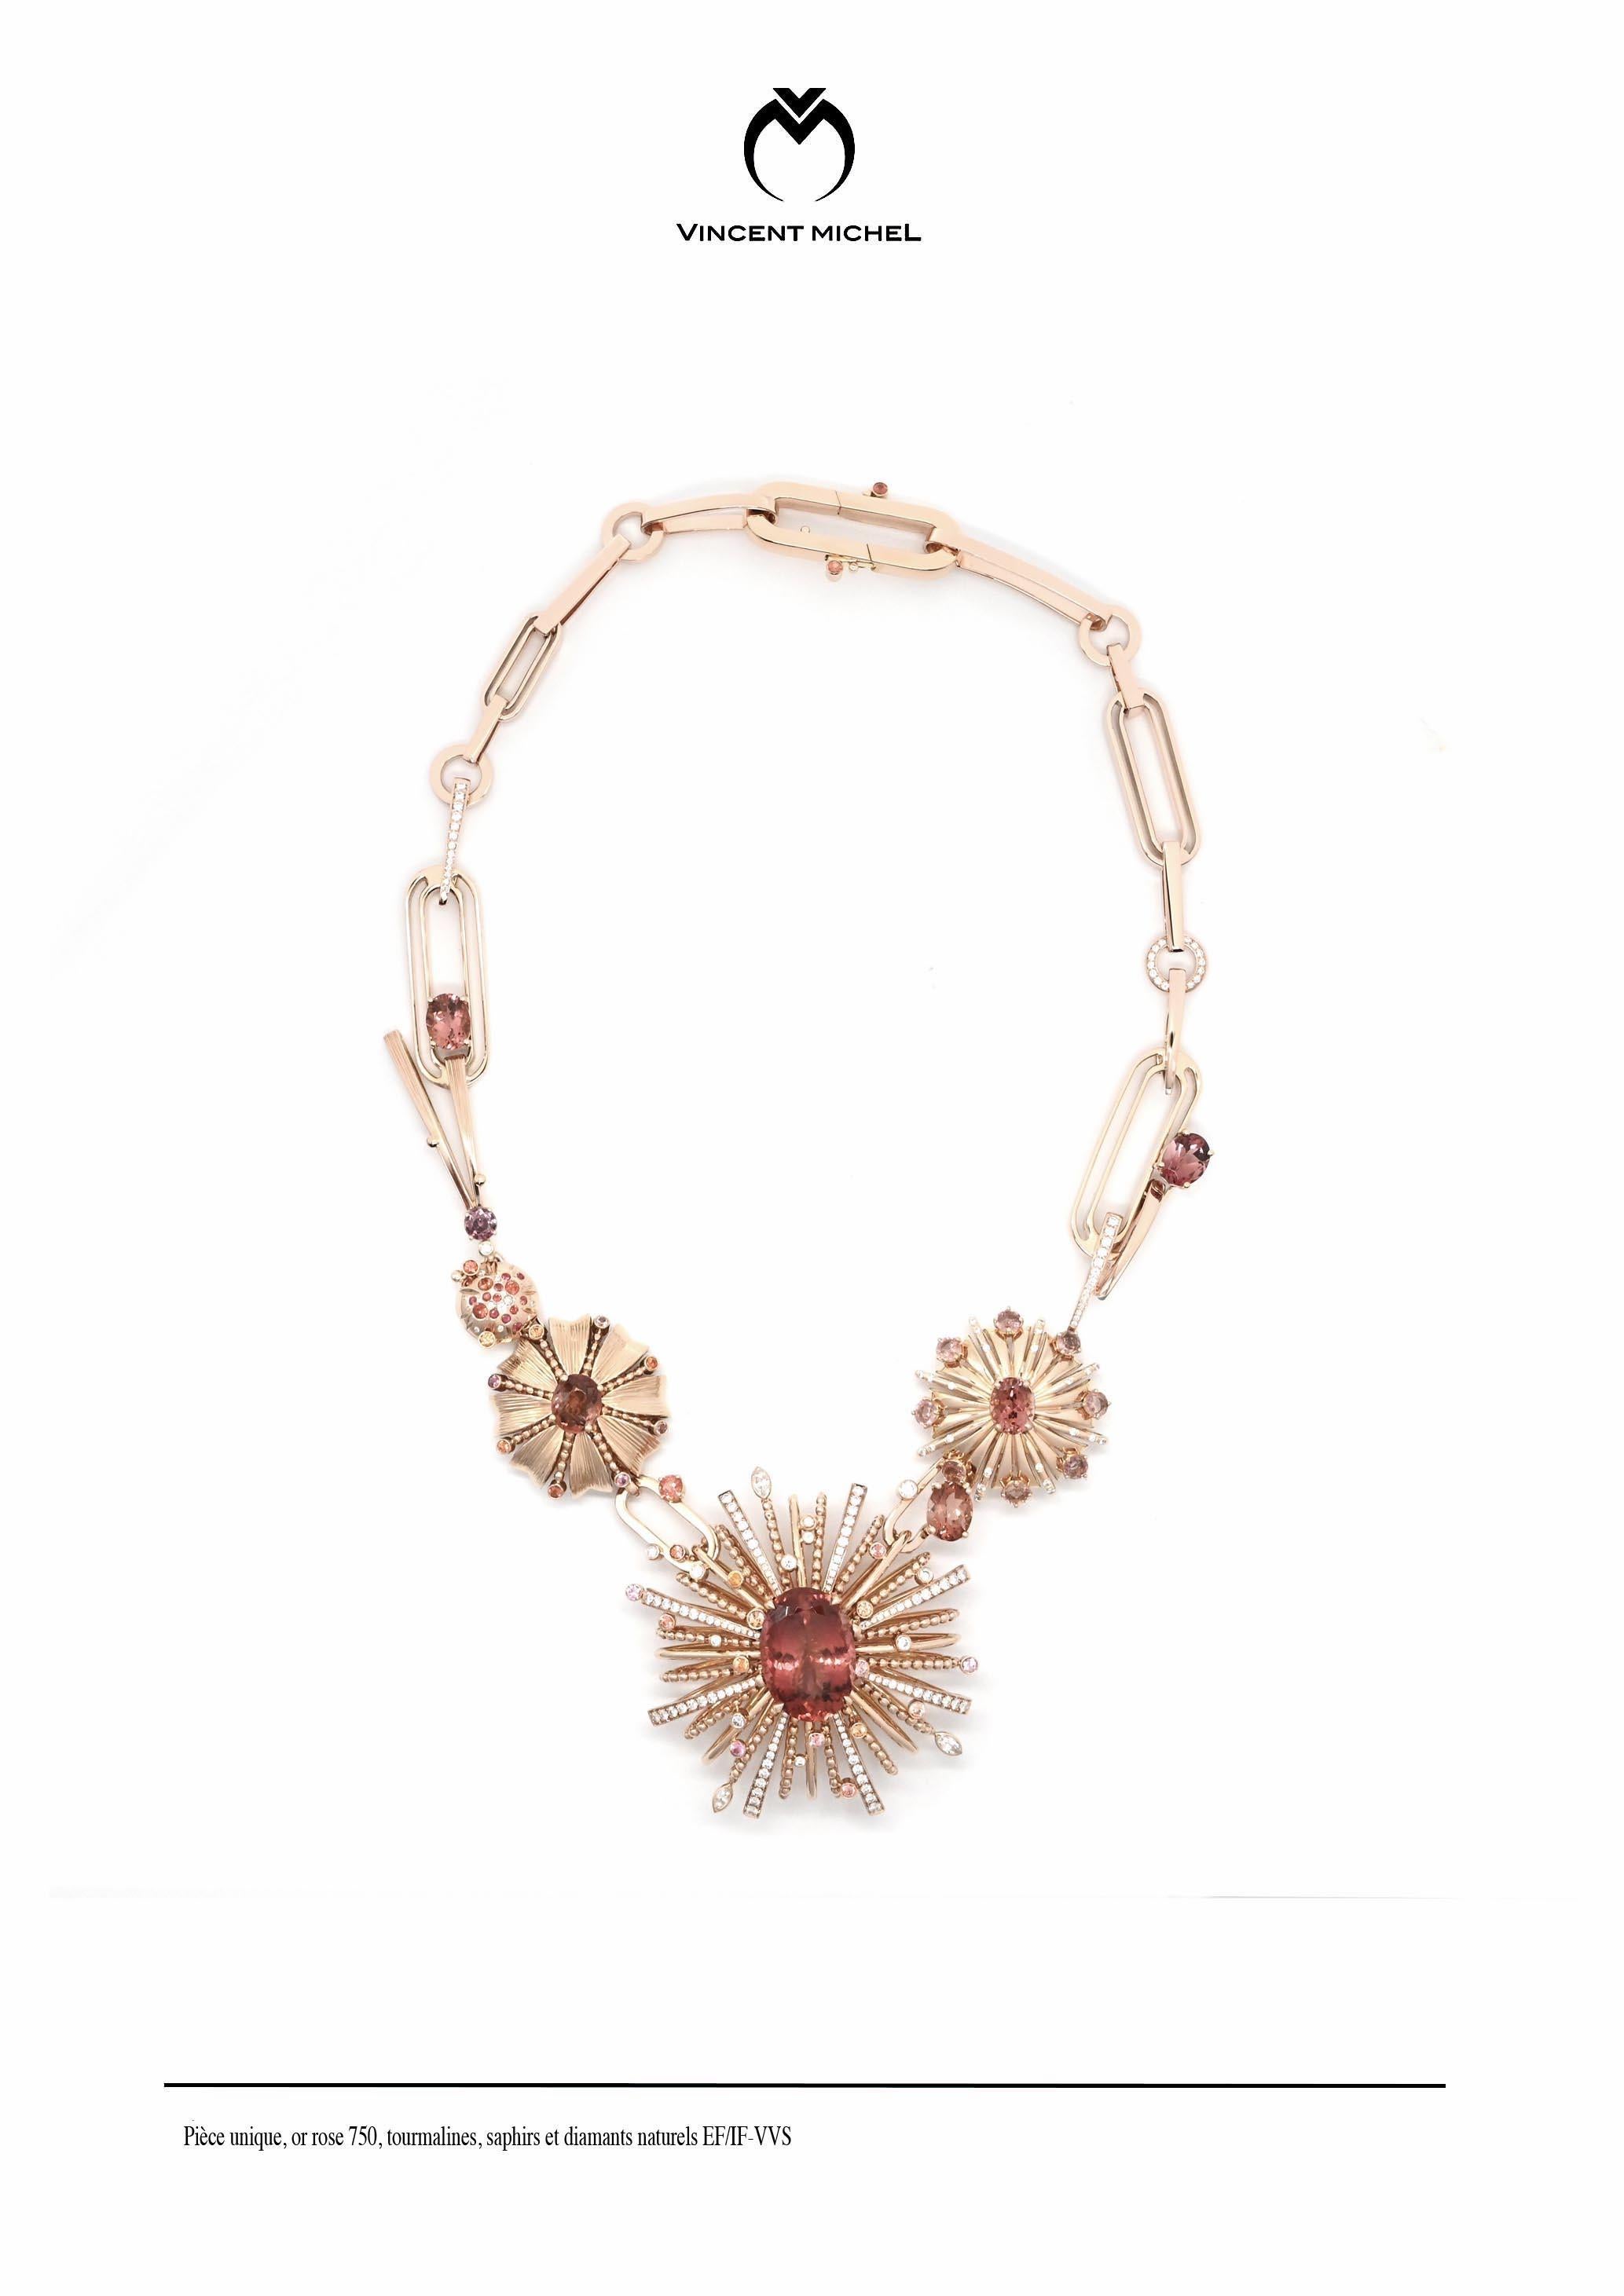 The Nuit d'Eclats necklace (Night of Radiance) is crafted in 750 rose gold and set with tourmalines (central oval : 18.01cts)  209 top quality DEF/IFVVS
natural diamonds (brilliant and
marquise cut) and orange sapphires. 

Entirely handcrafted in